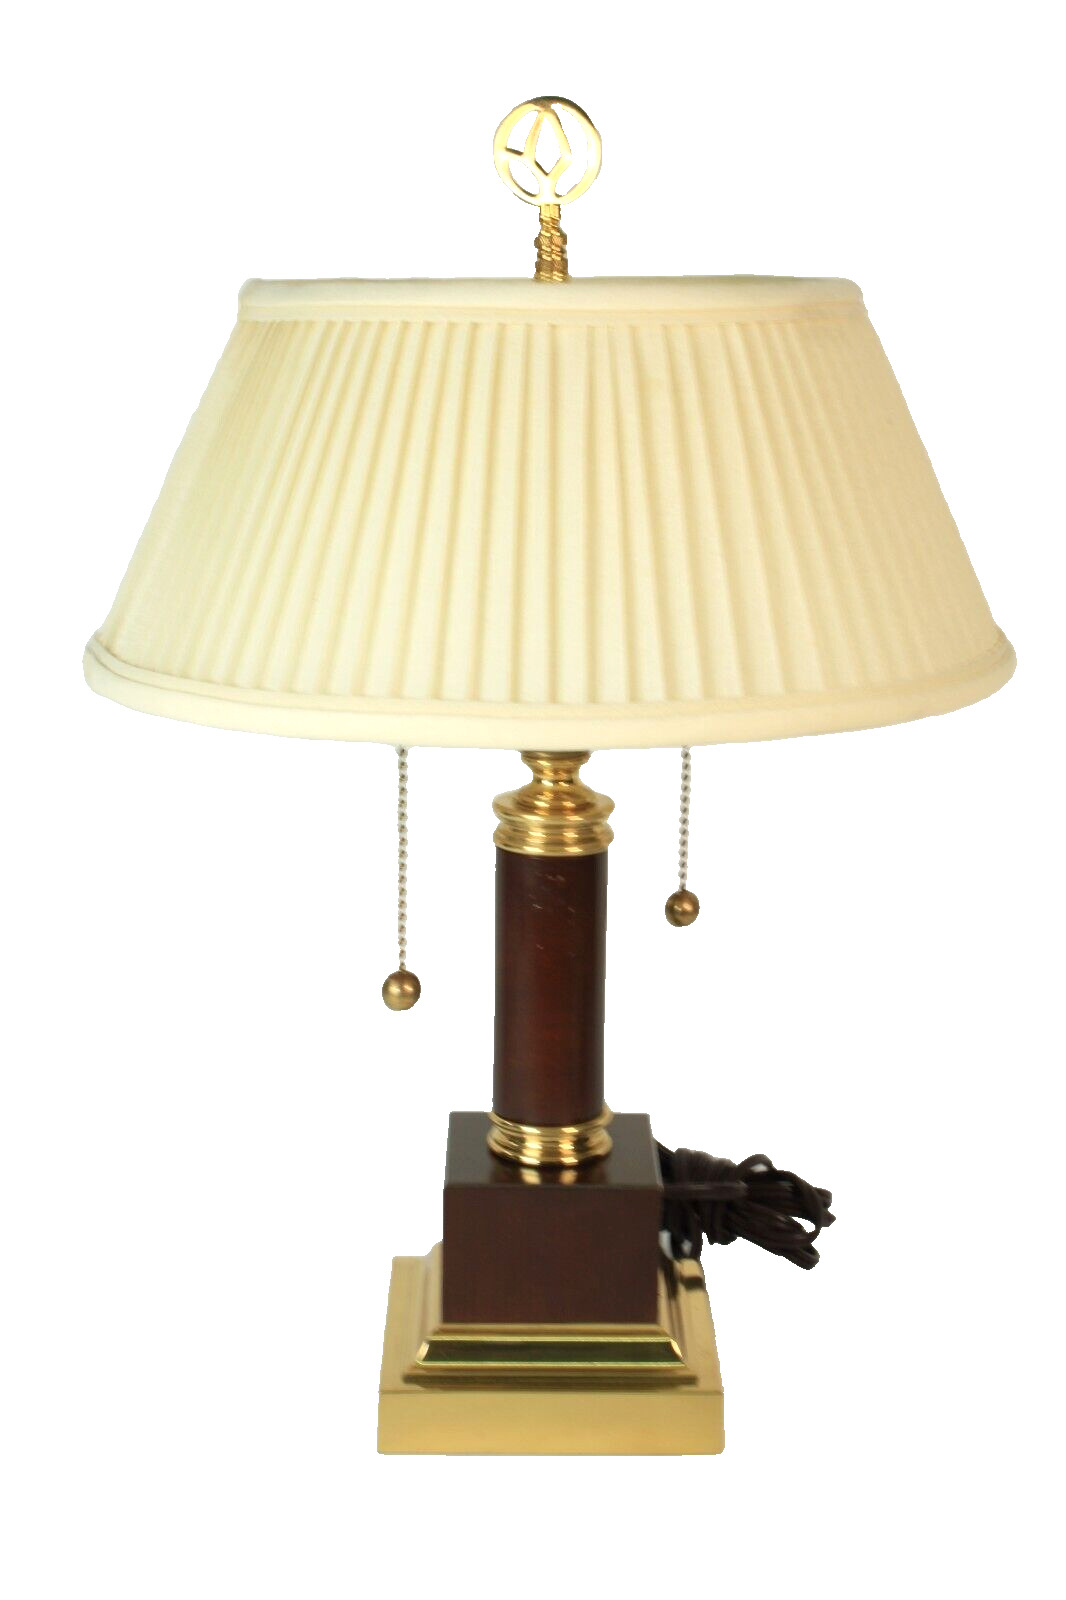 Vintage Cherry Wood And Brass Desk Lamp